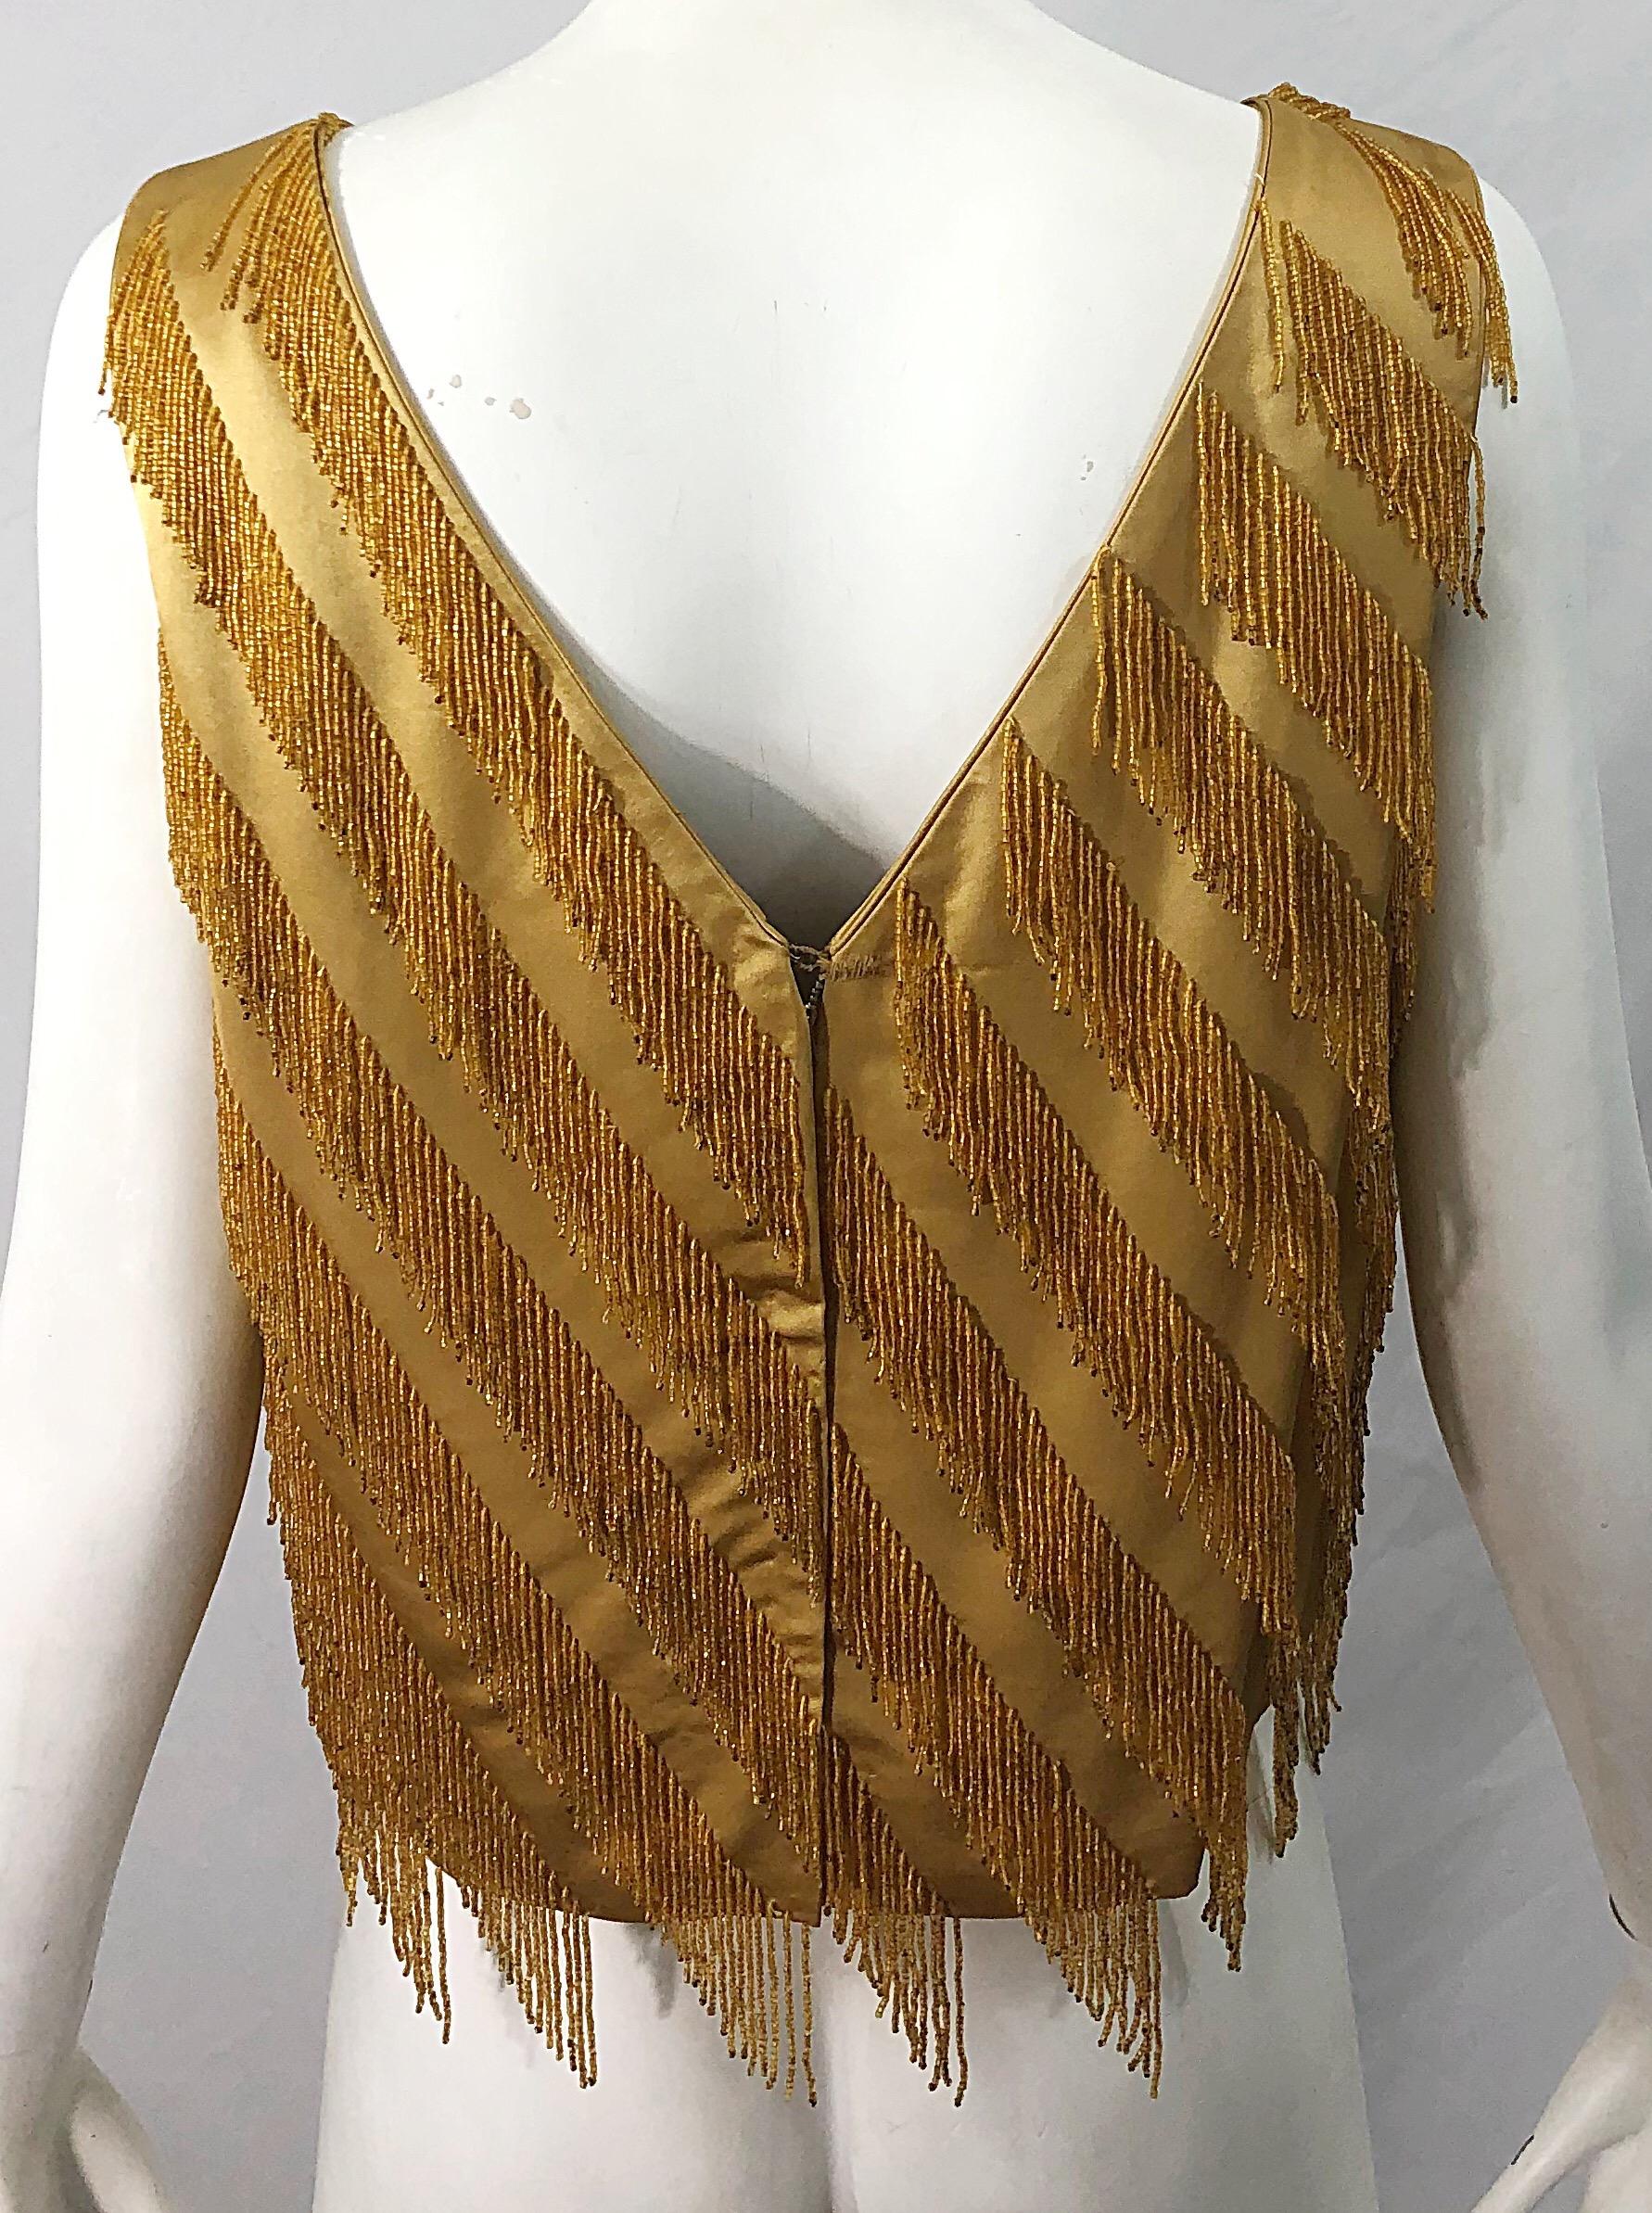 1960s Gene Shelly Gold Beaded Silk Rayon Vintage 60s Sleeveless Blouse Top In Excellent Condition For Sale In San Diego, CA